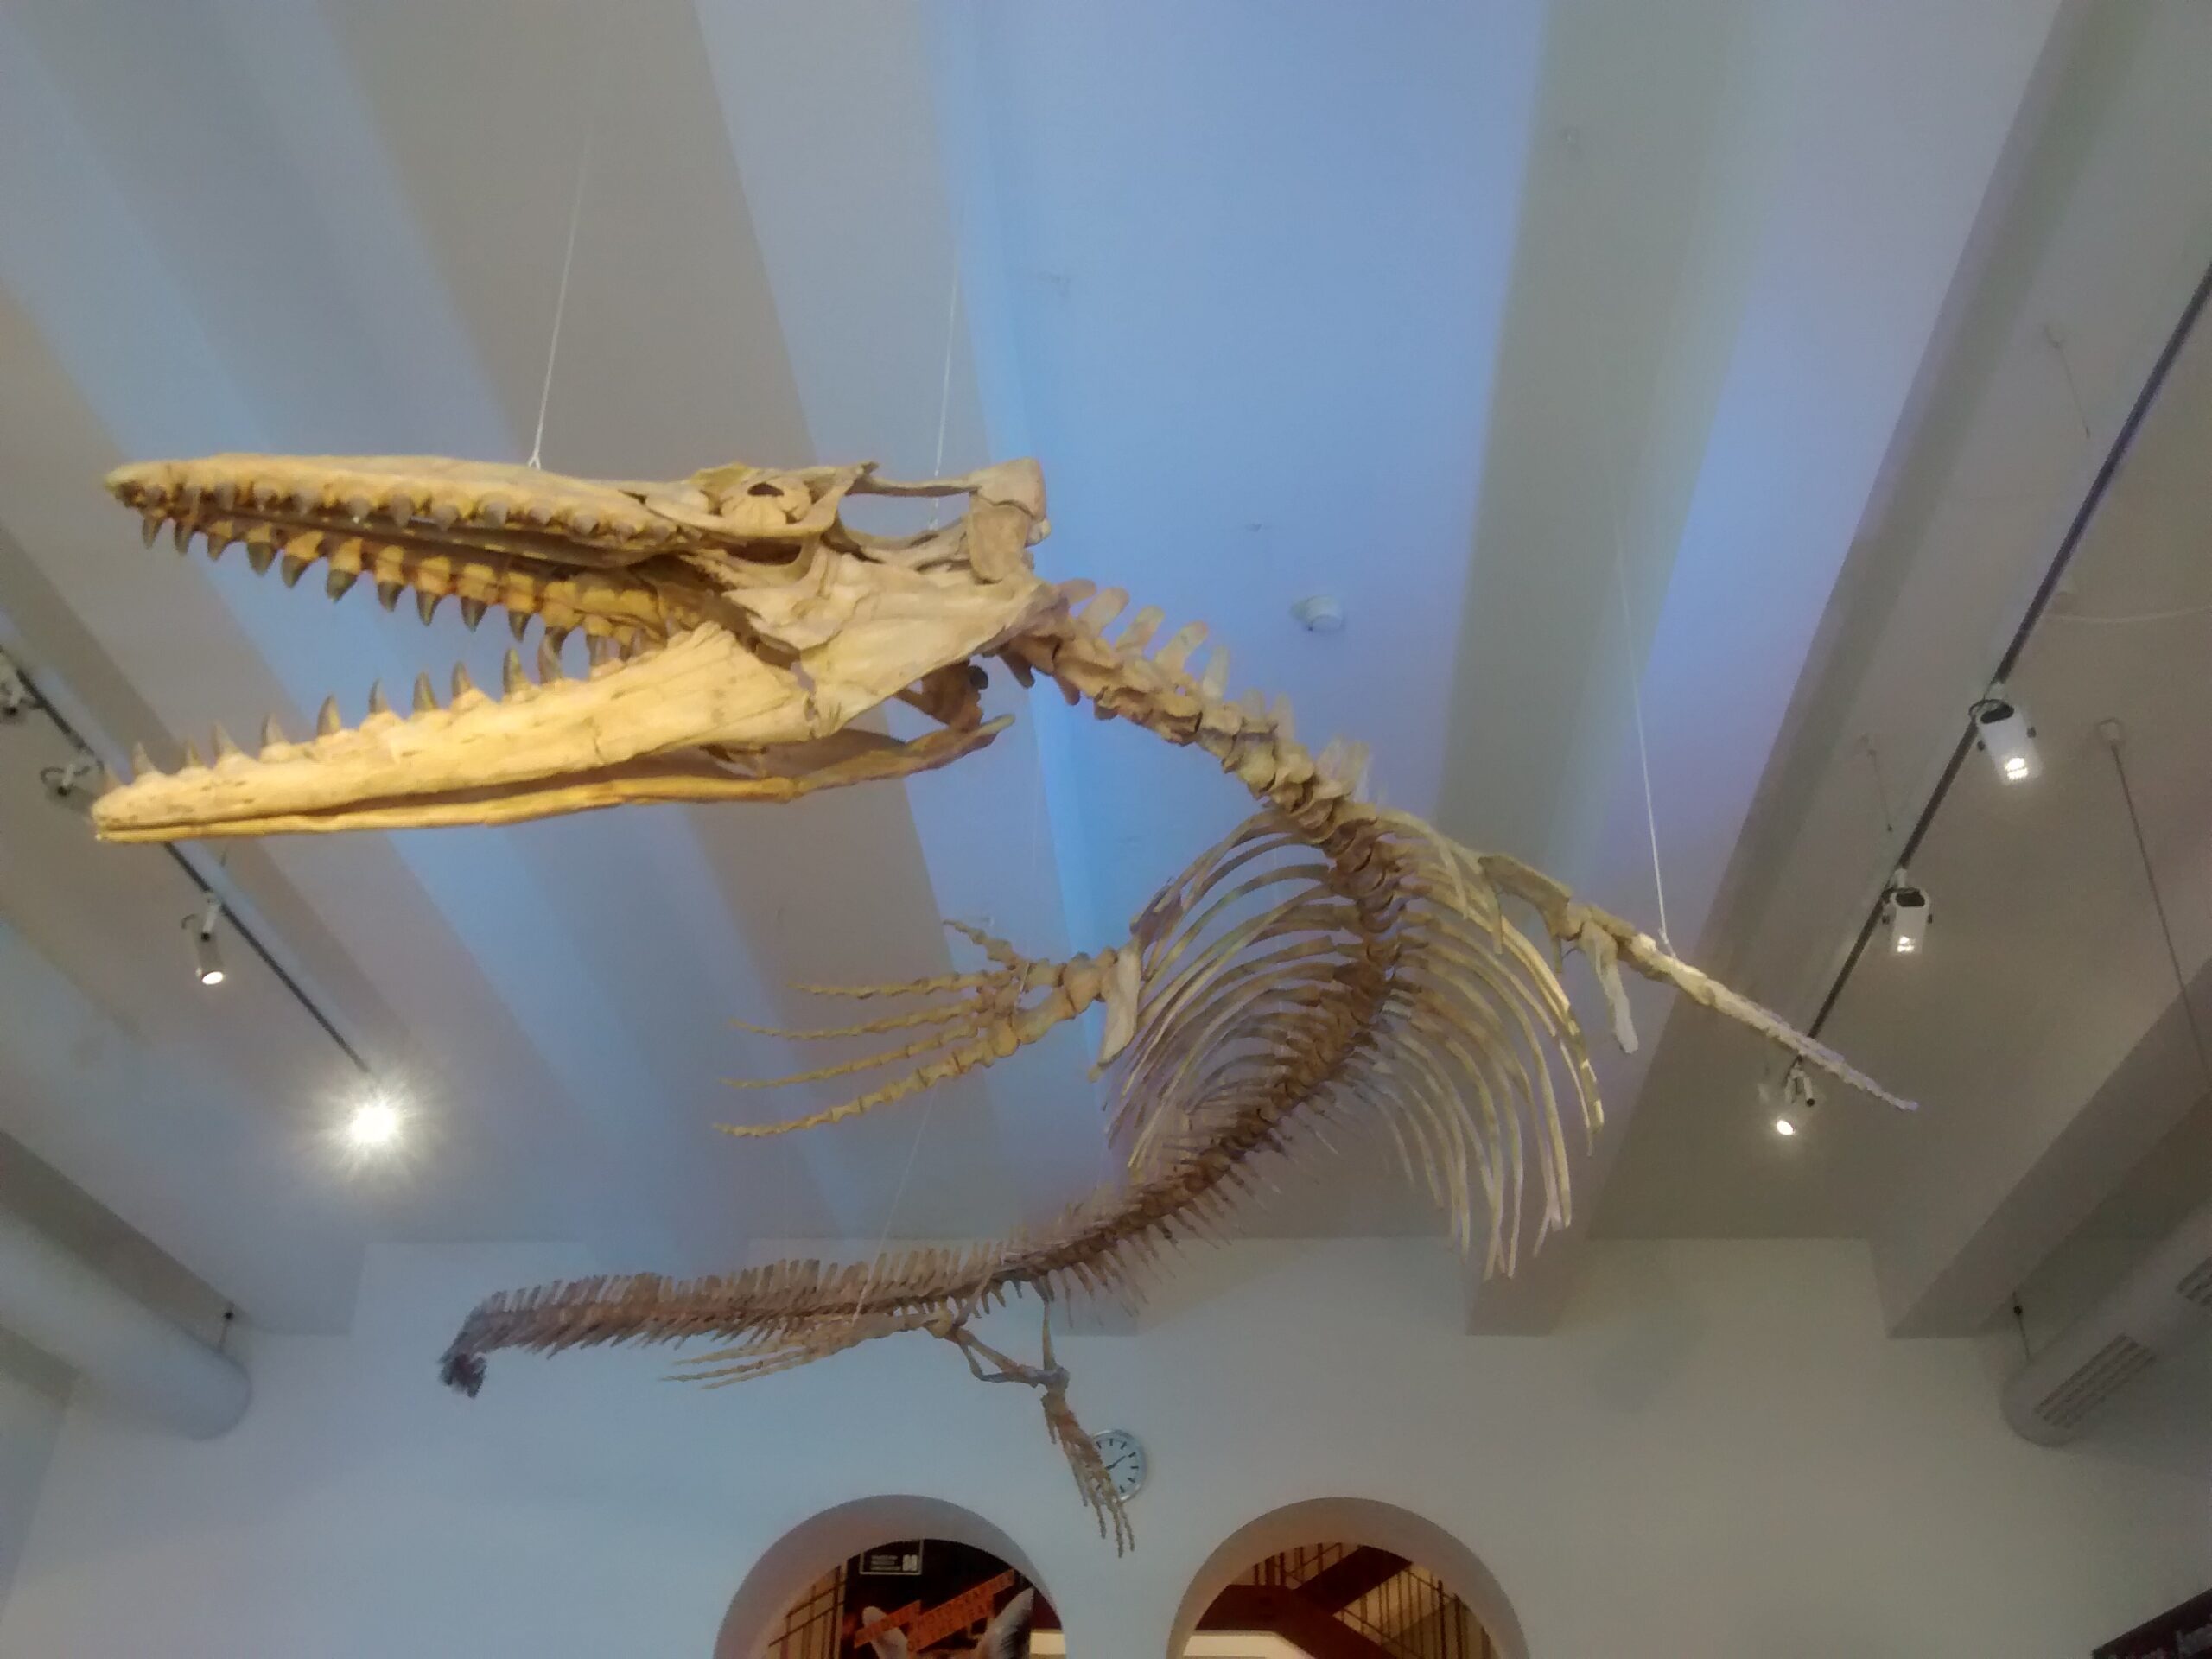 Skeleton of a ferocious-looking sea creature displayed in a museum